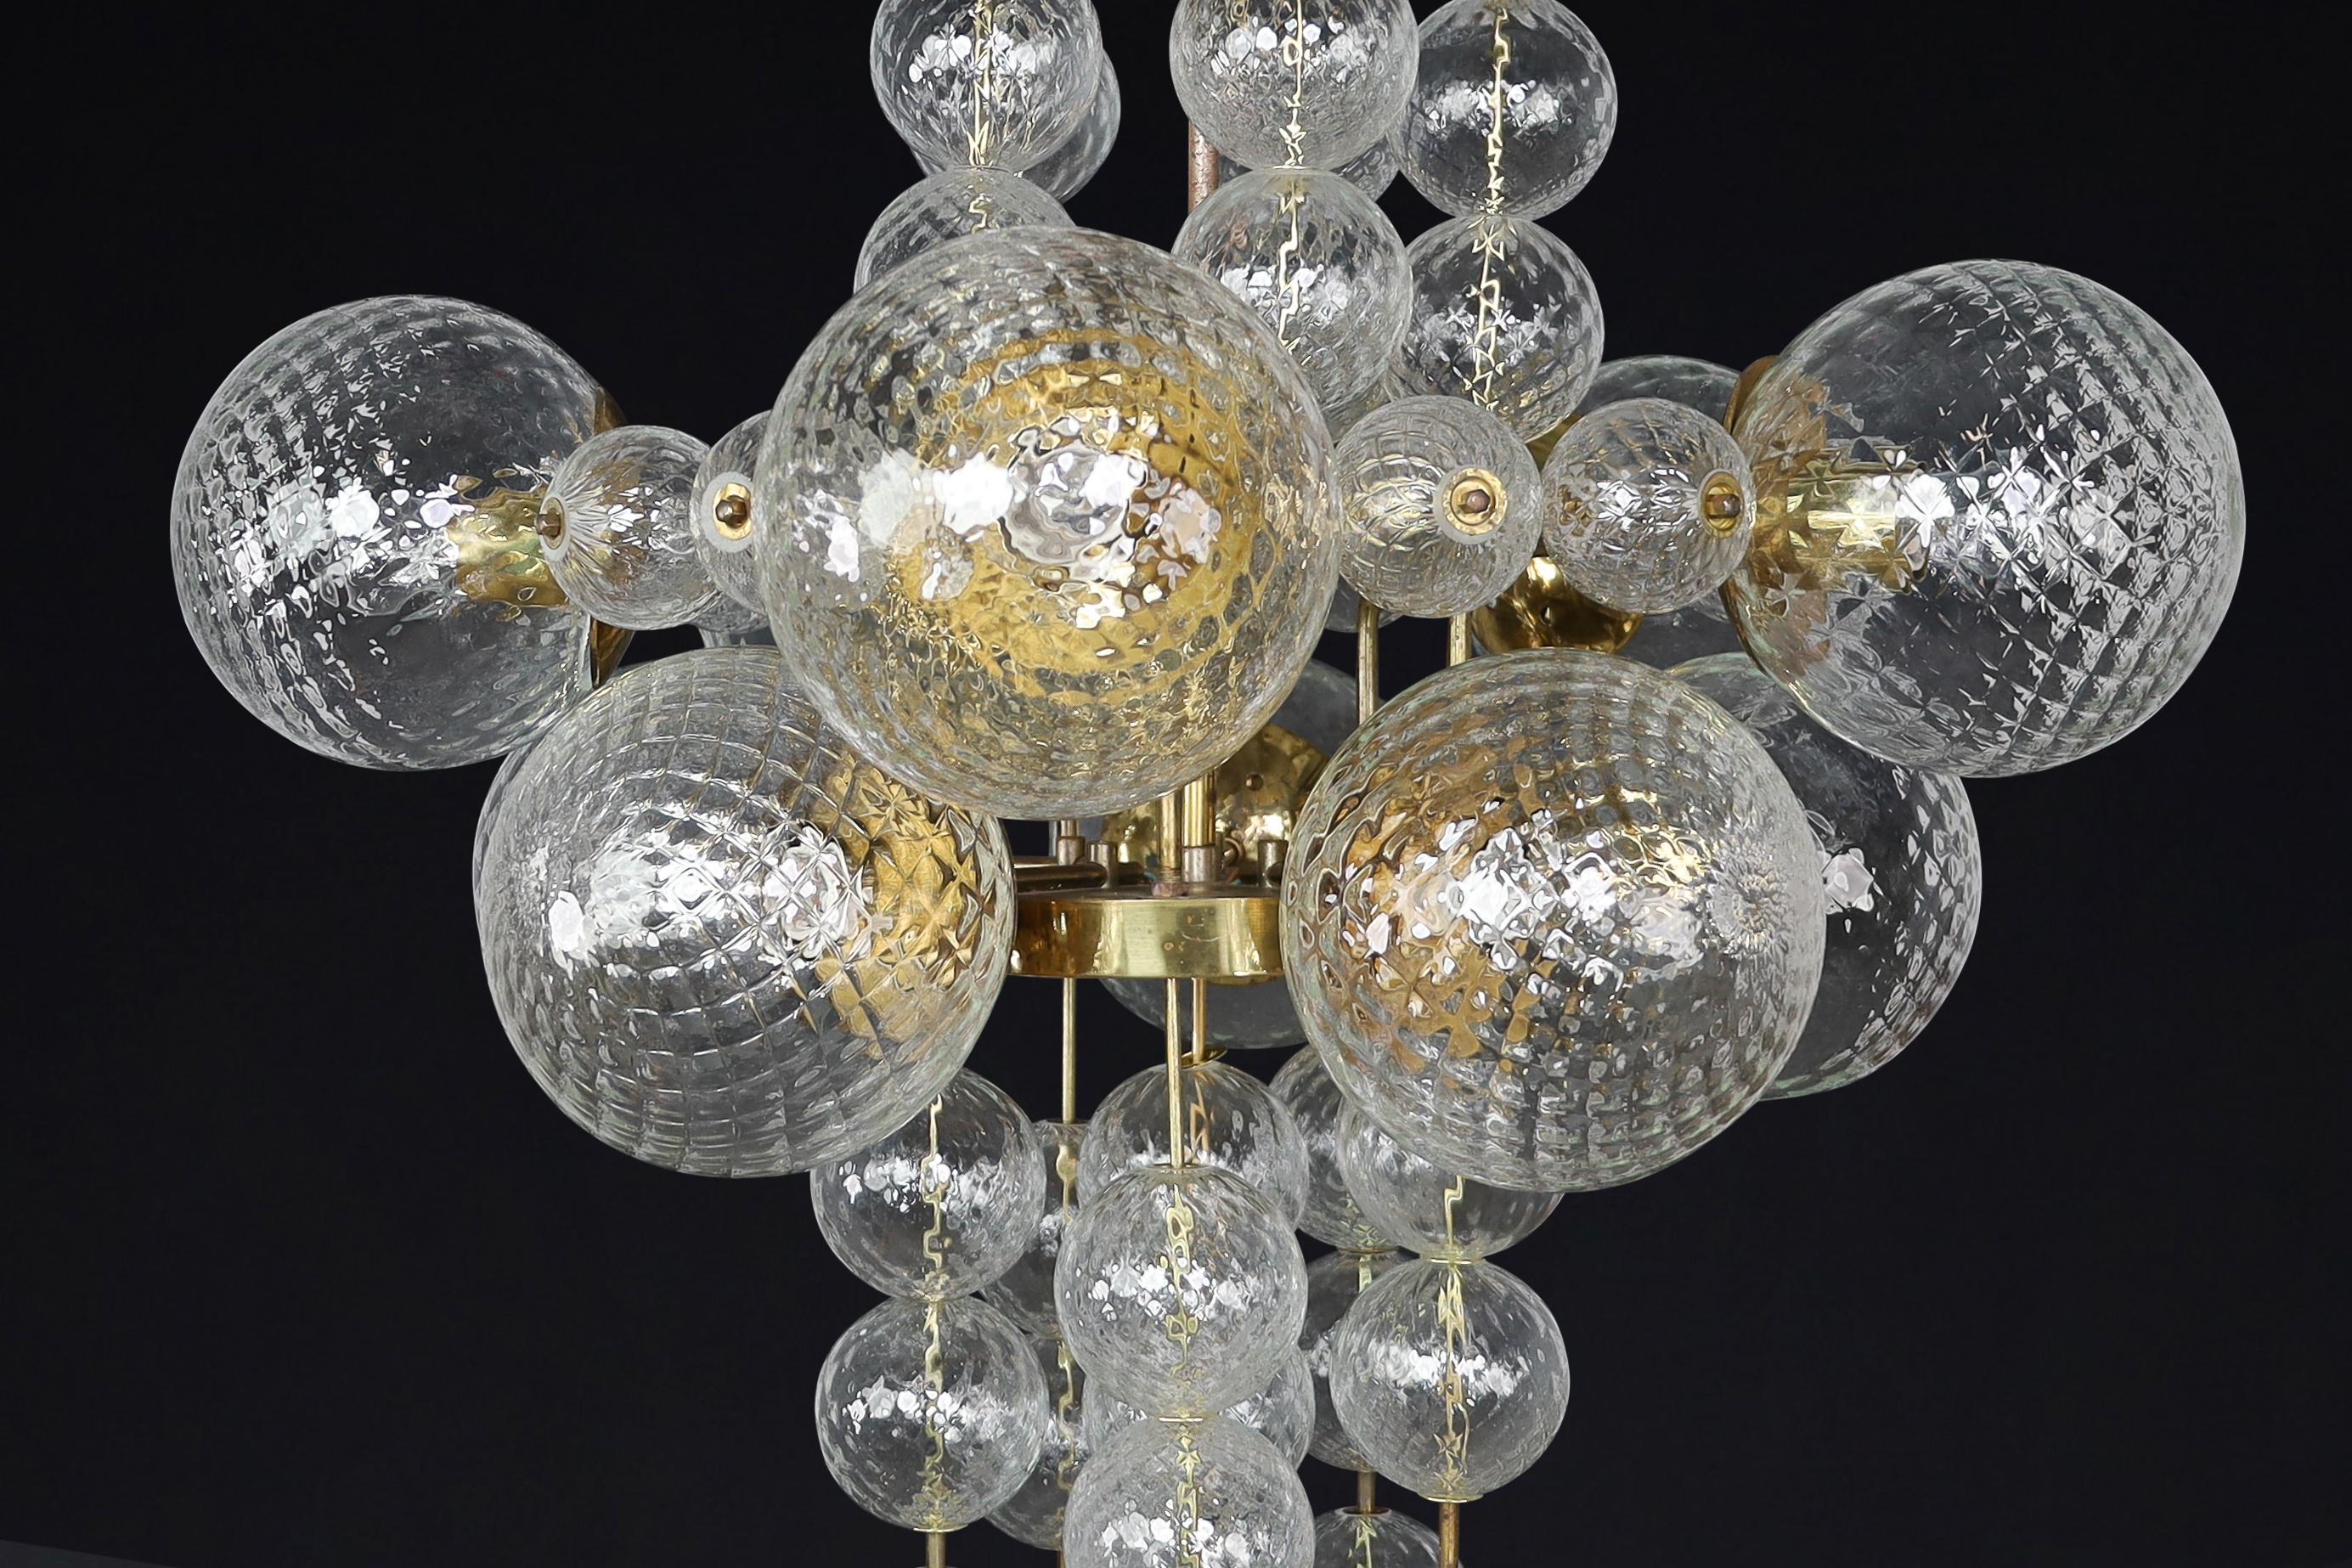  Chandelier with Patinated brass fixture and hand-blowed glass globes  CZ 1960s For Sale 4